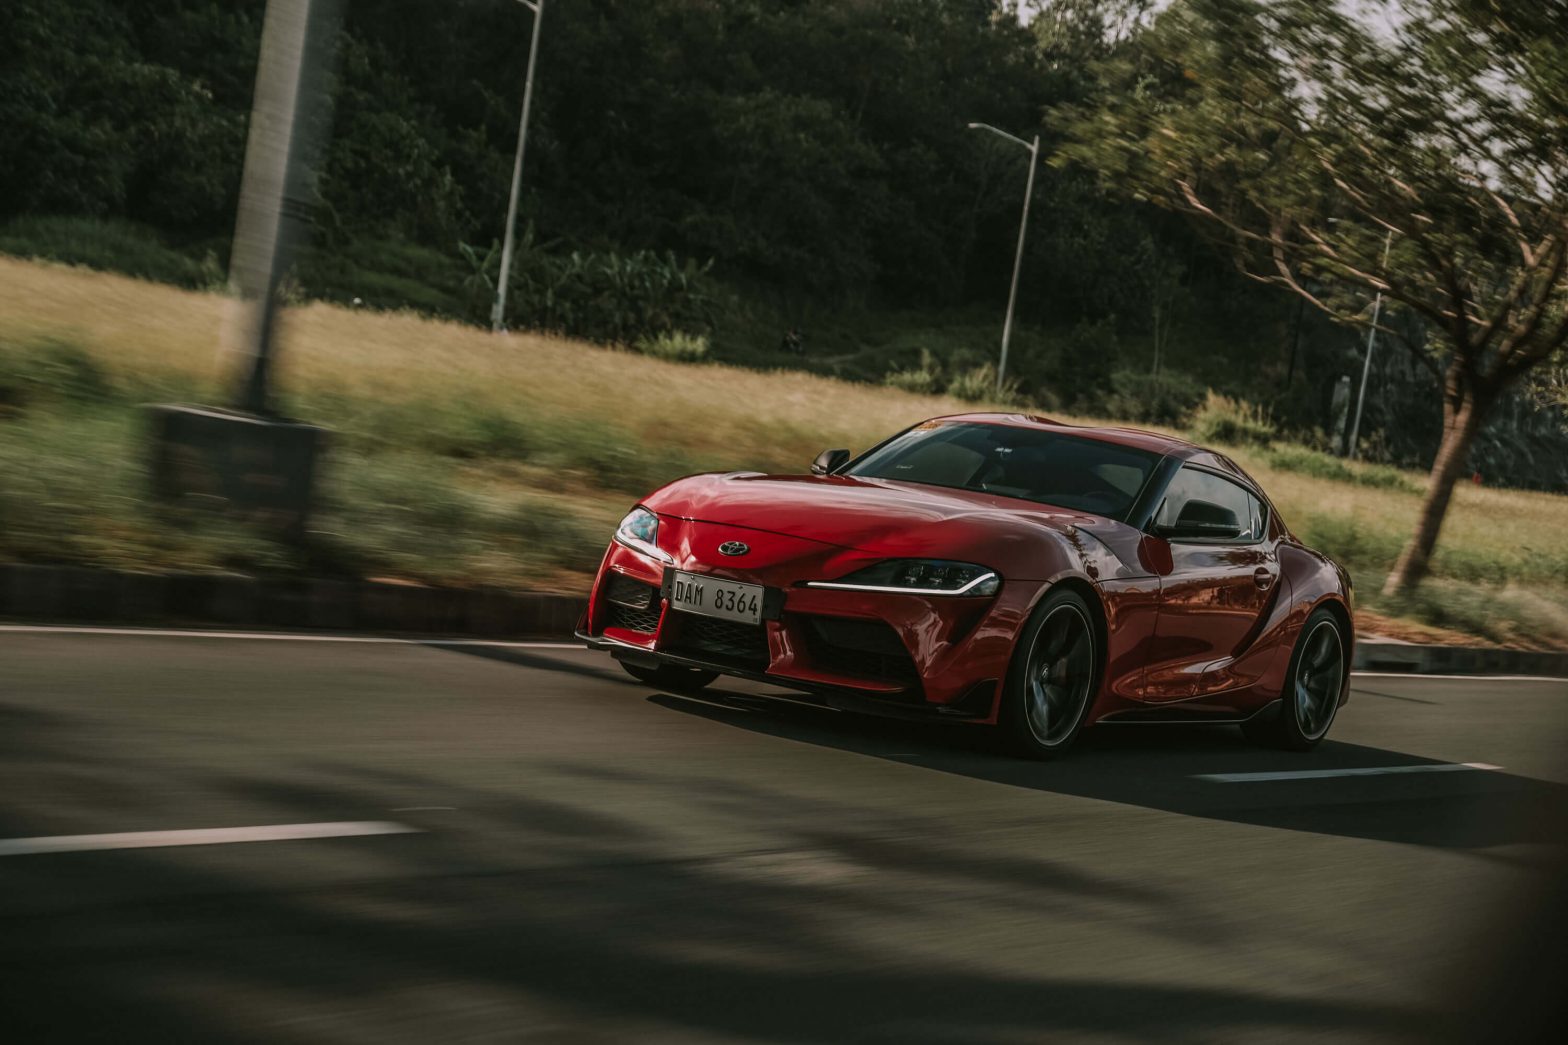 Toyota Supra: A heritage of power, passion, and experience